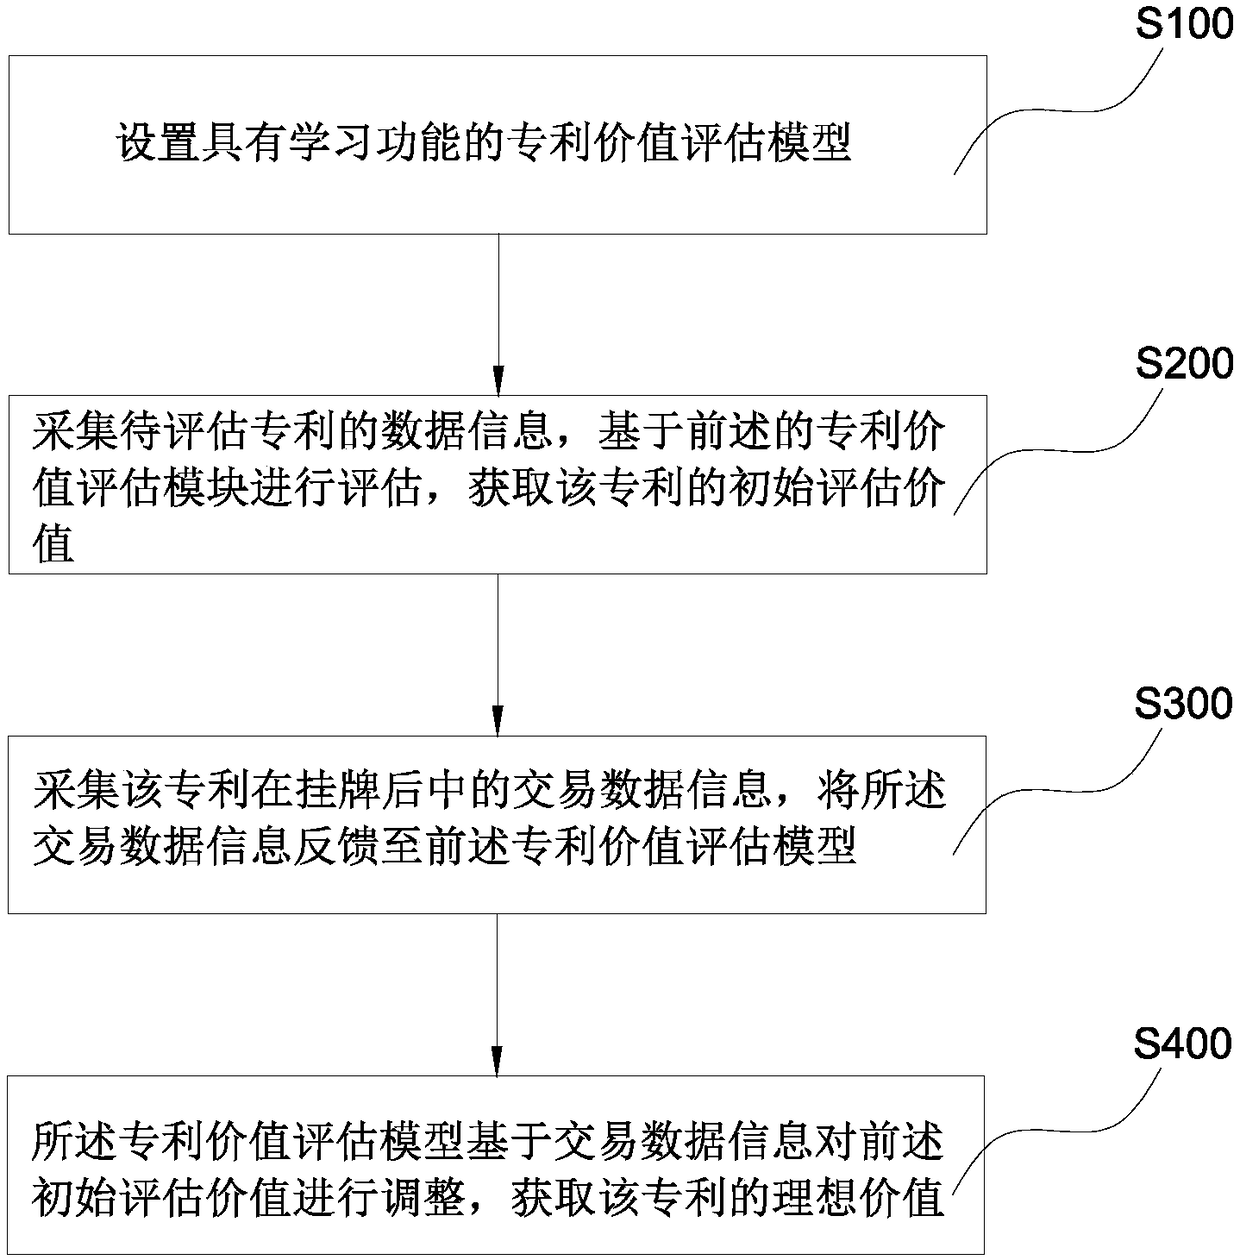 Patent value evaluation method and system based on AI